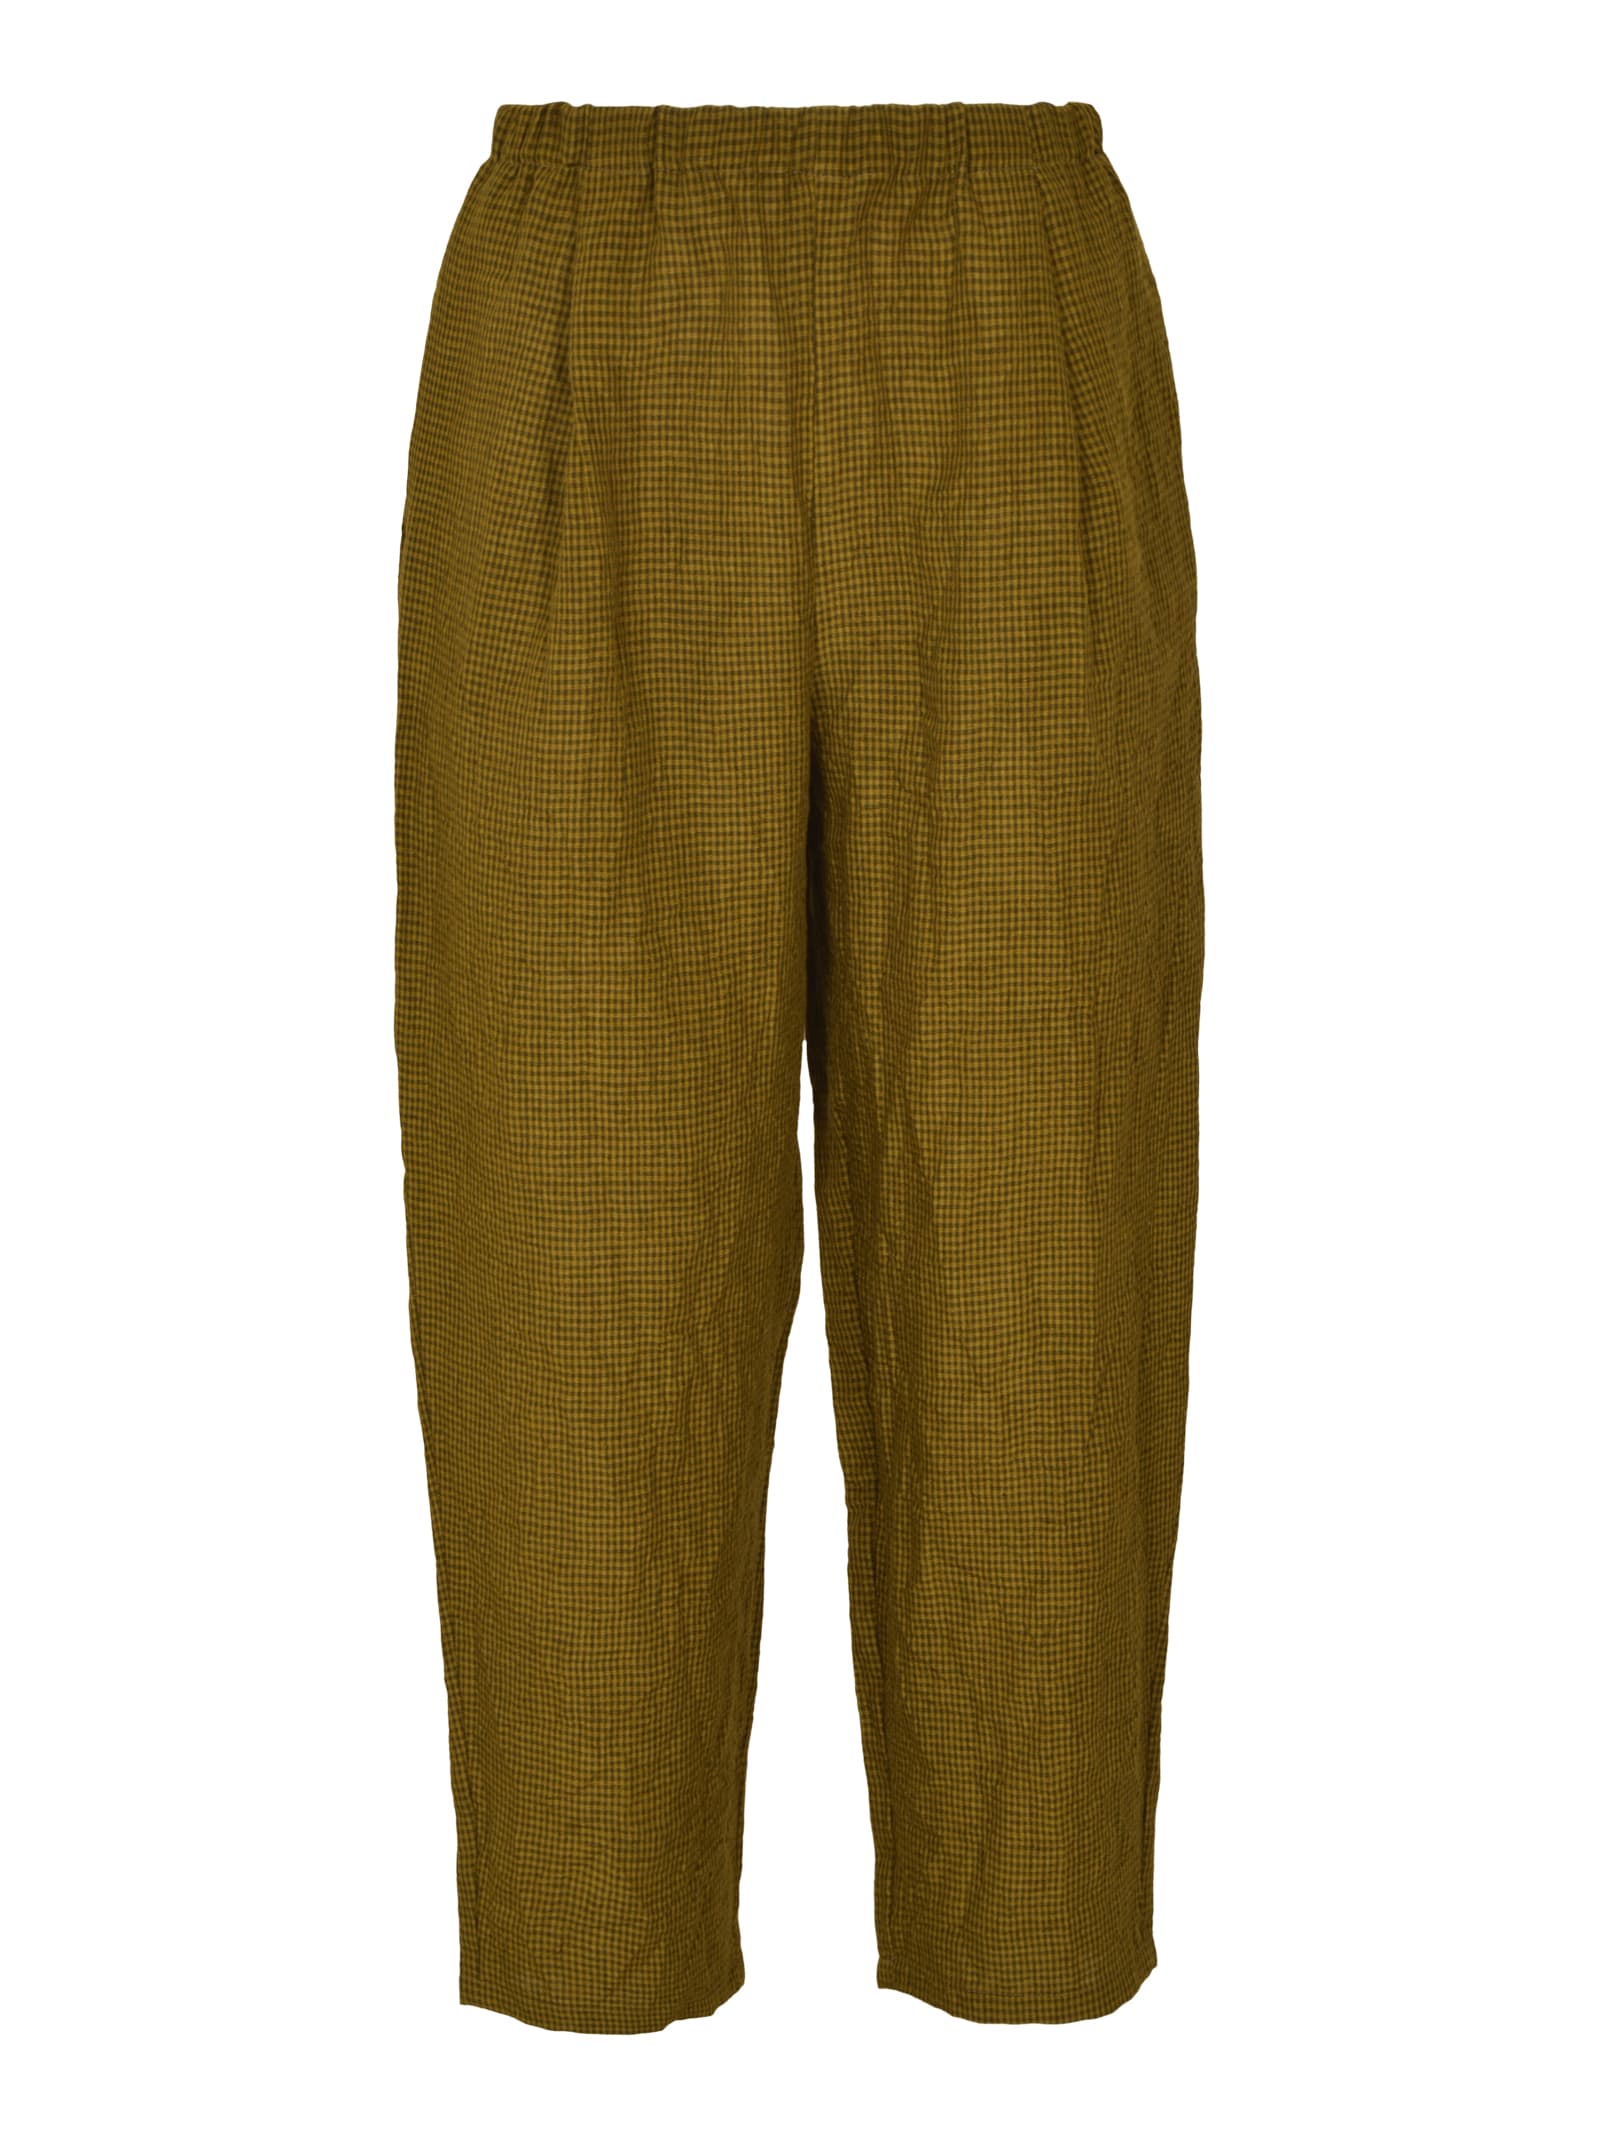 A Punto B Elastic Waist Check Cropped Trousers In Prato Military